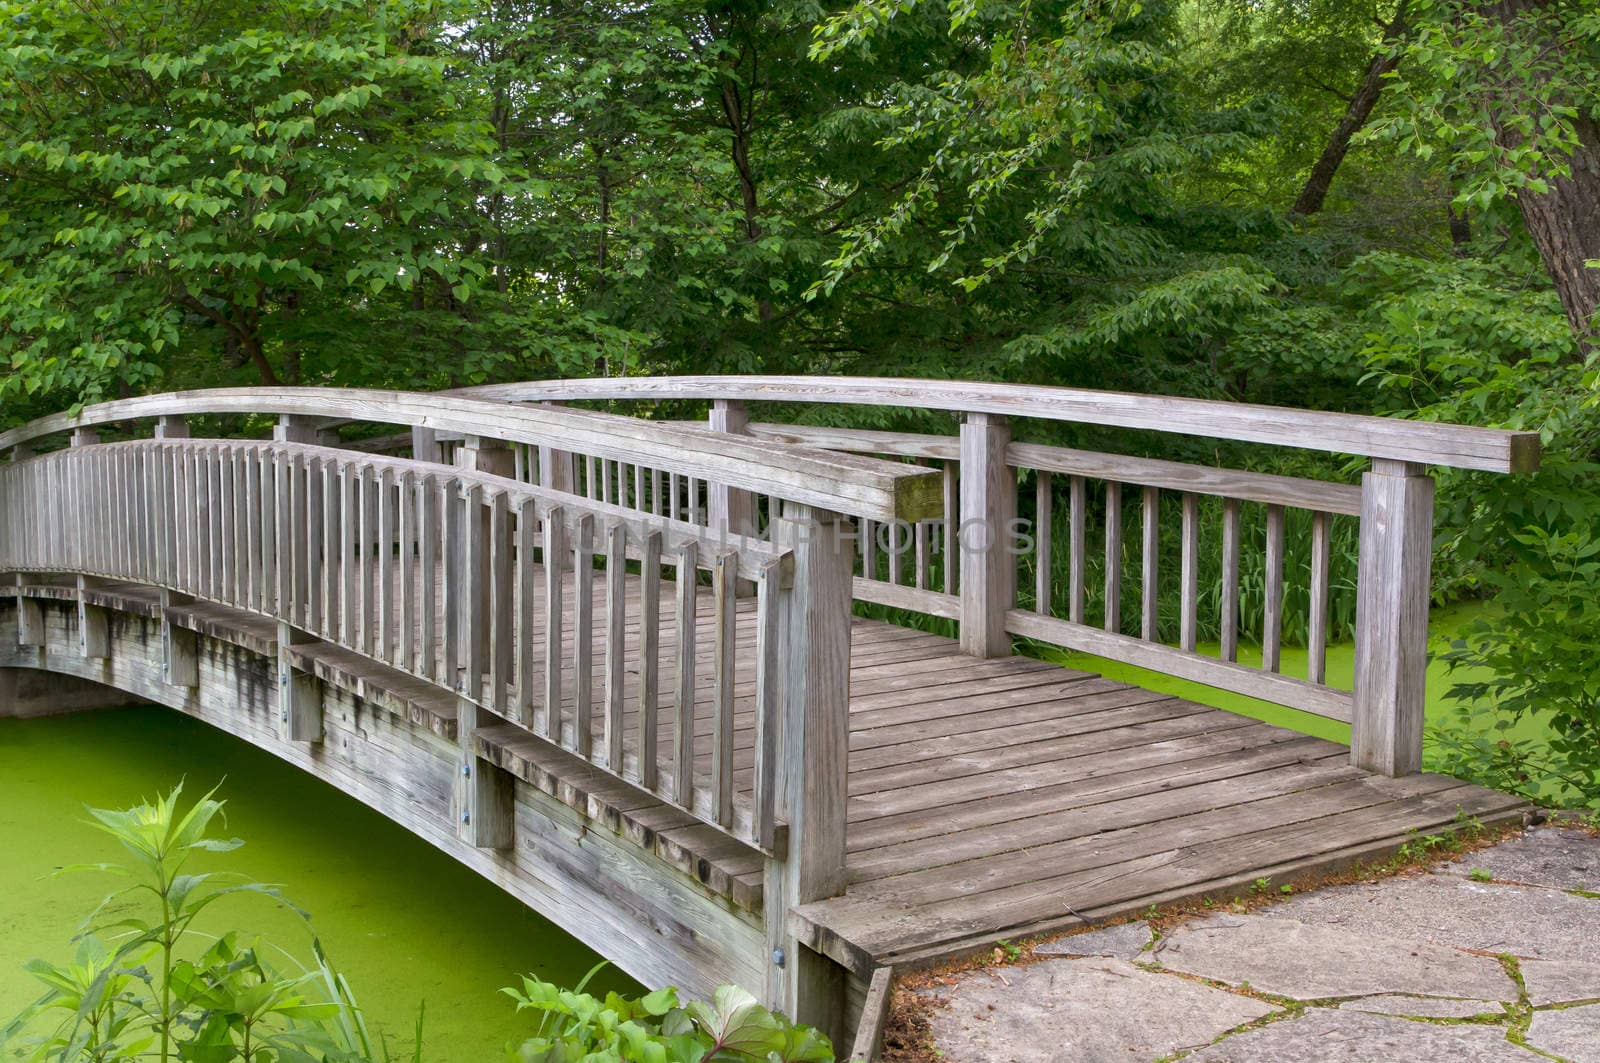 Wood Bridge Over Pond by wolterk